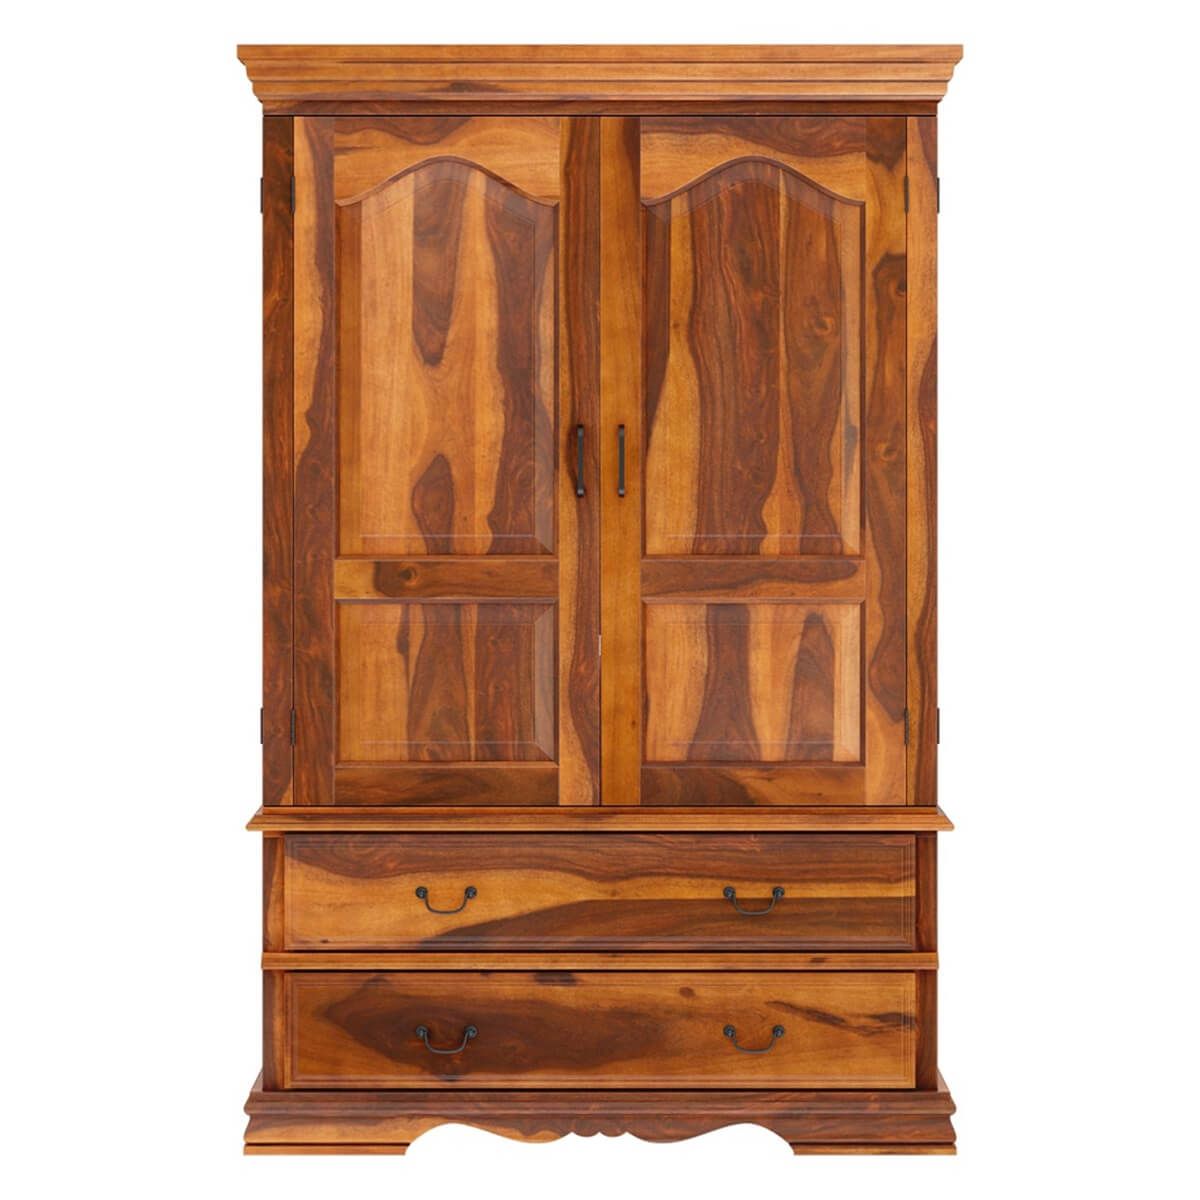 Shelburne Rustic Solid Wood Large Tv Armoire Cabinet With In Wood Tv Armoire (View 13 of 15)